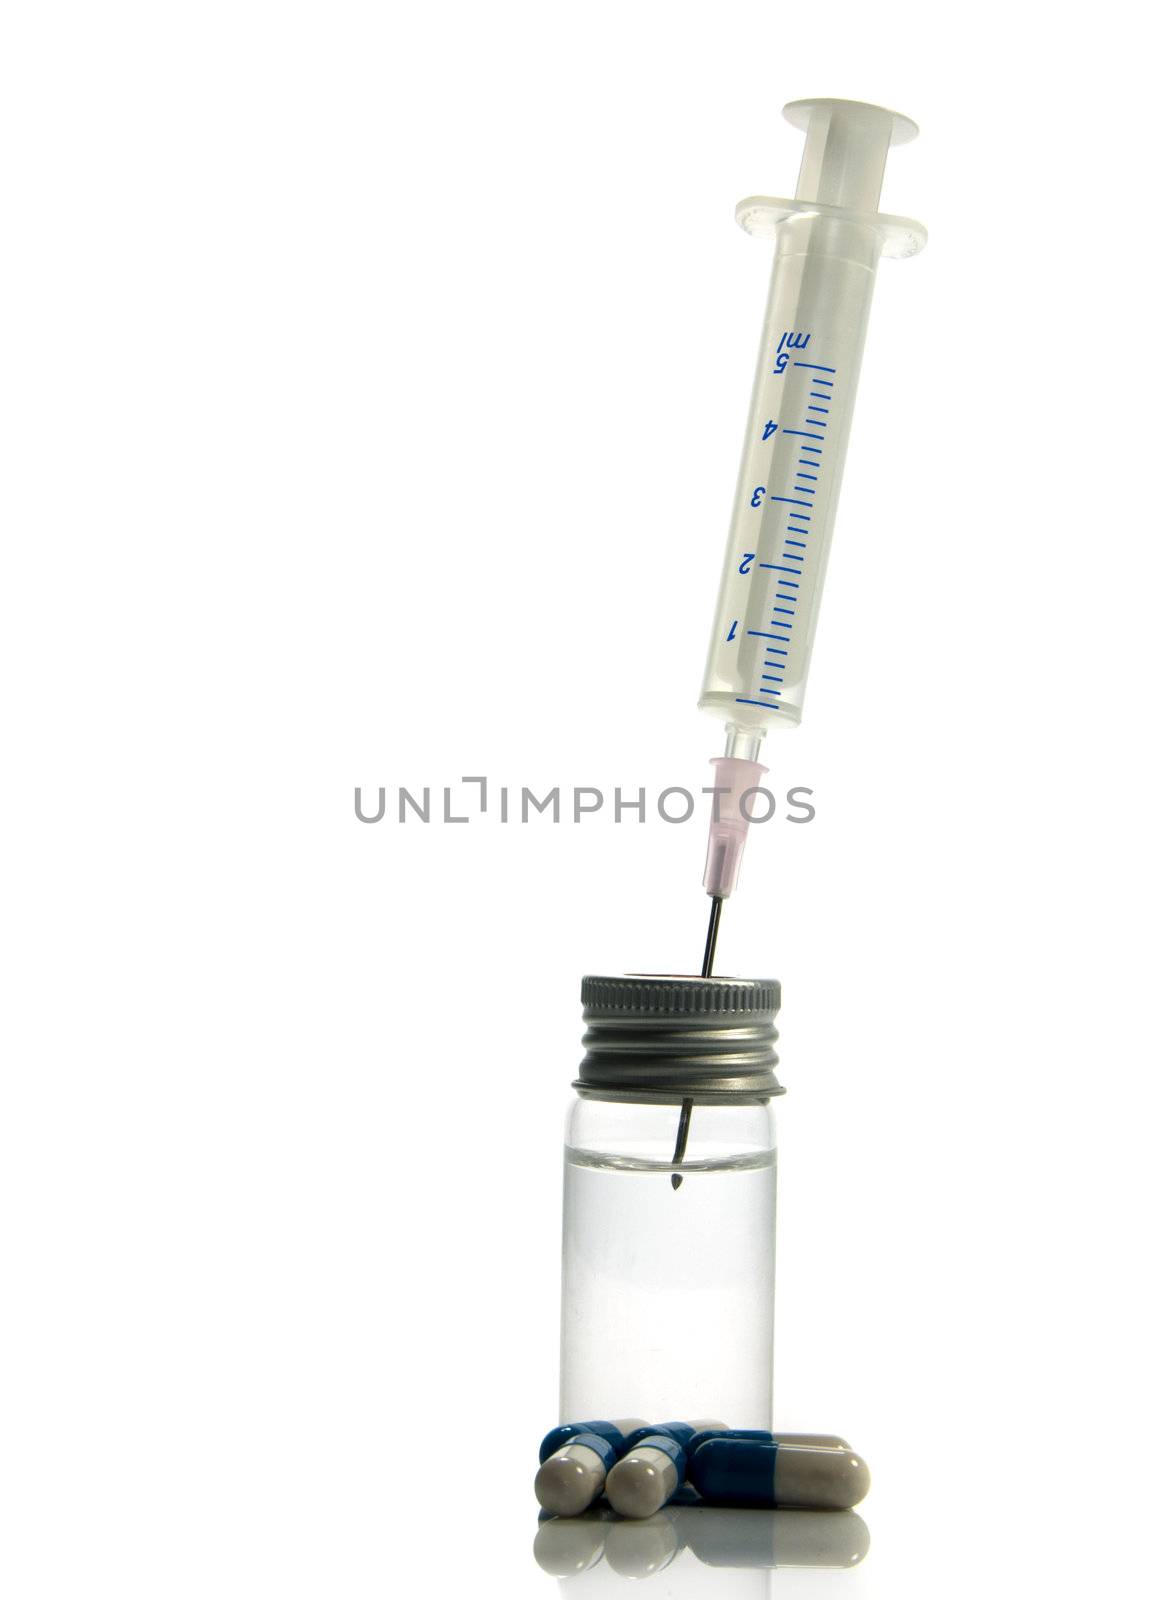 medical needle in bottle with liquid isolated on white